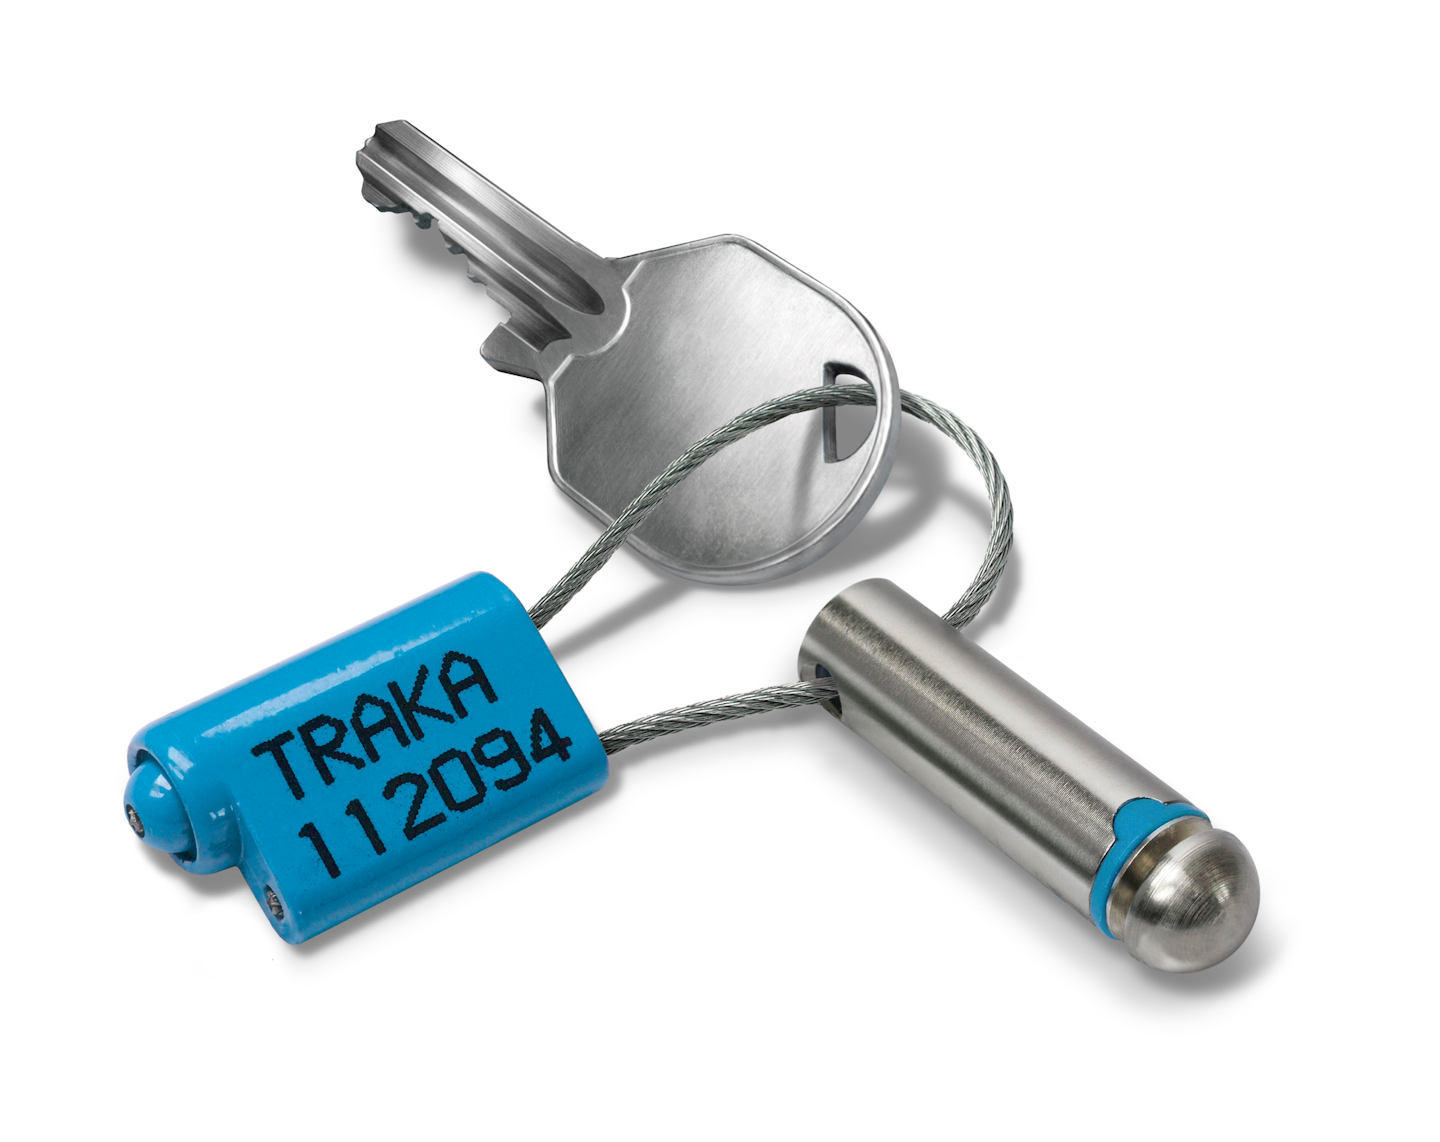 Traka’s iFob key management solution remotely keeps track of keys and the vehicles they belong to.